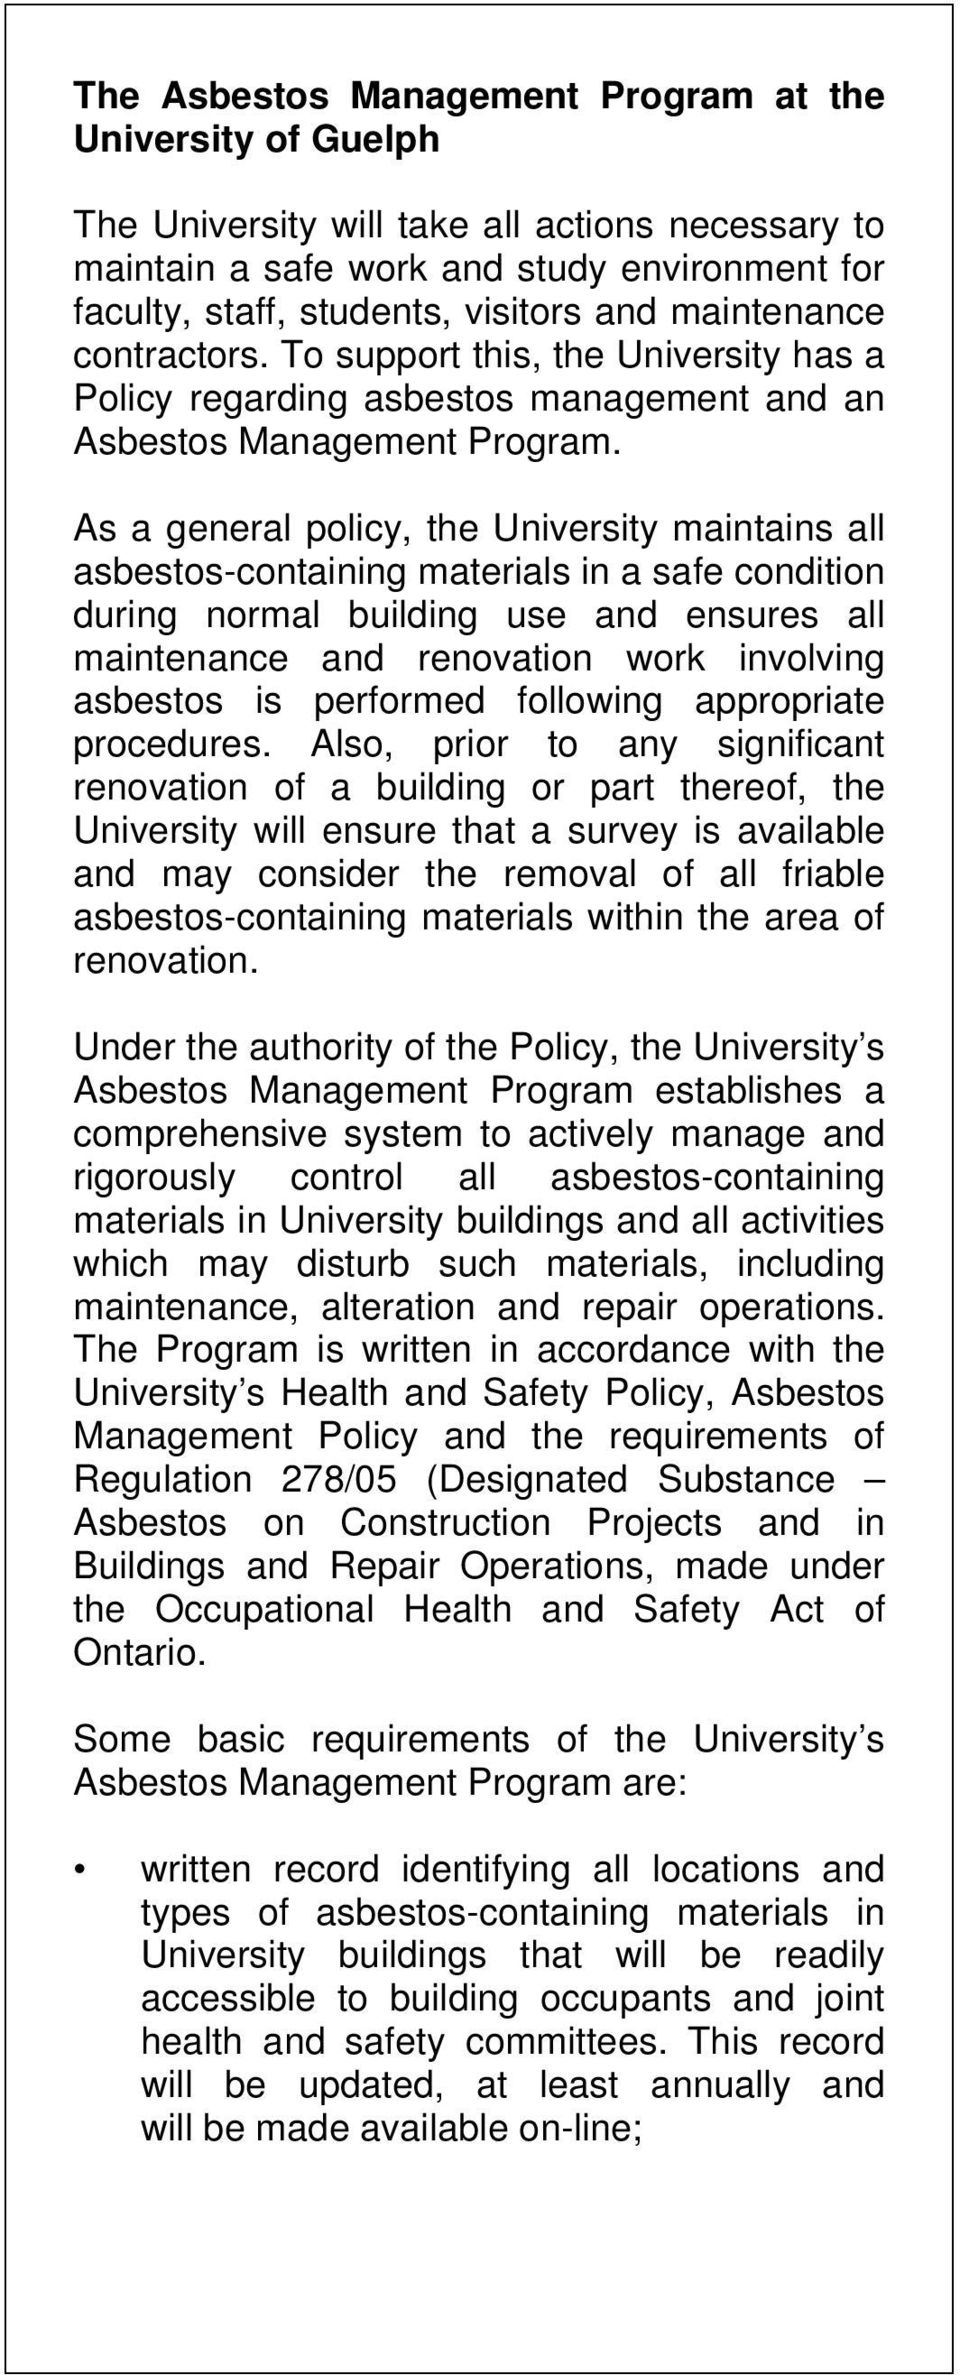 As a general policy, the University maintains all asbestos-containing materials in a safe condition during normal building use and ensures all maintenance and renovation work involving asbestos is